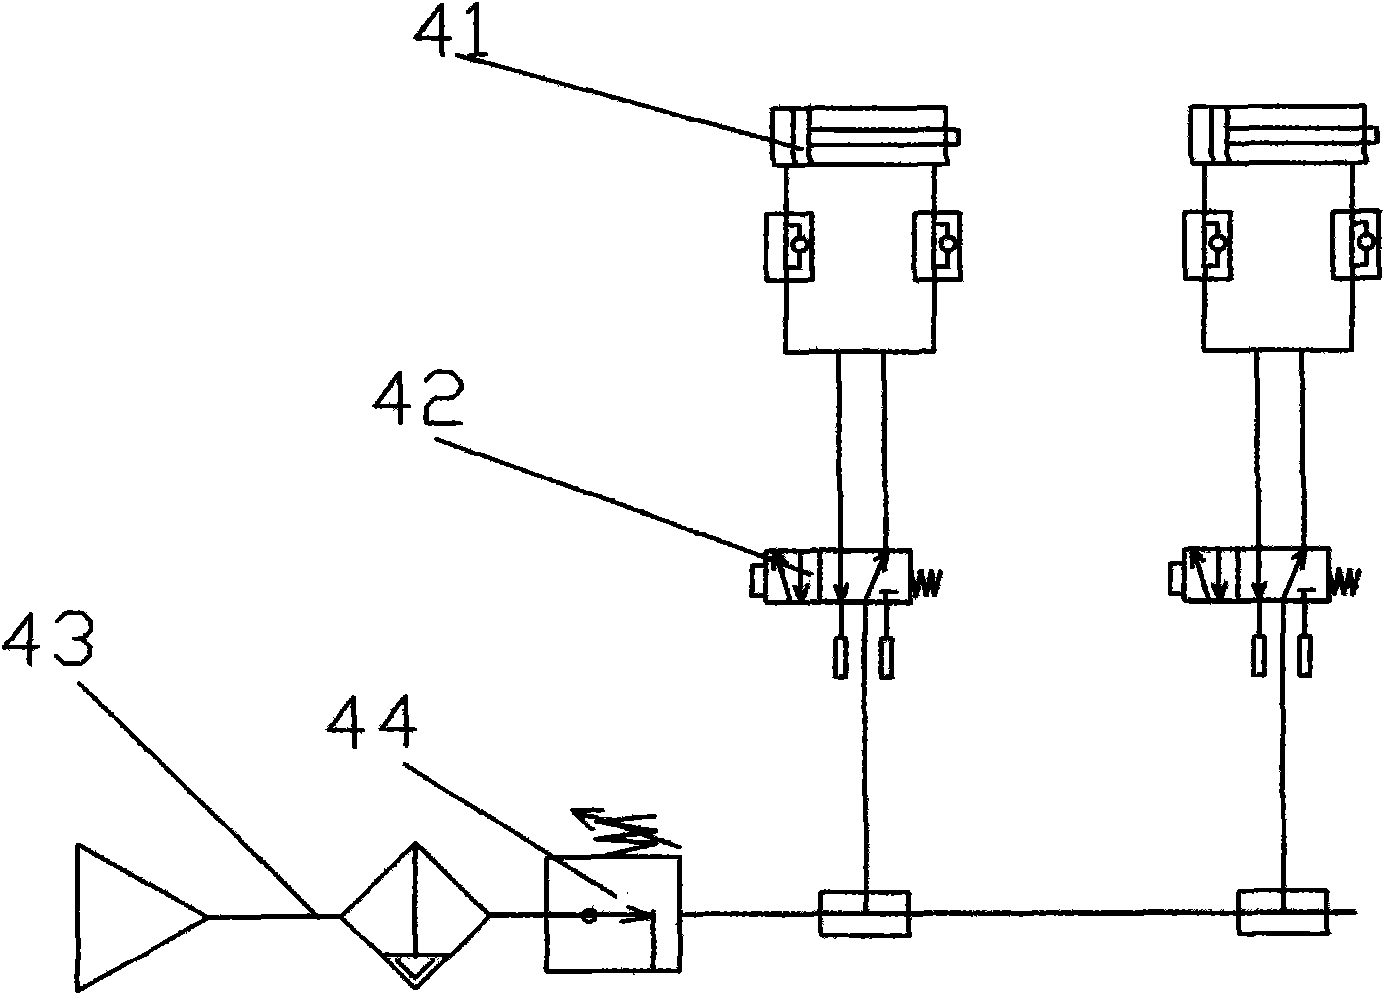 Automatic detection system for hardware appearance